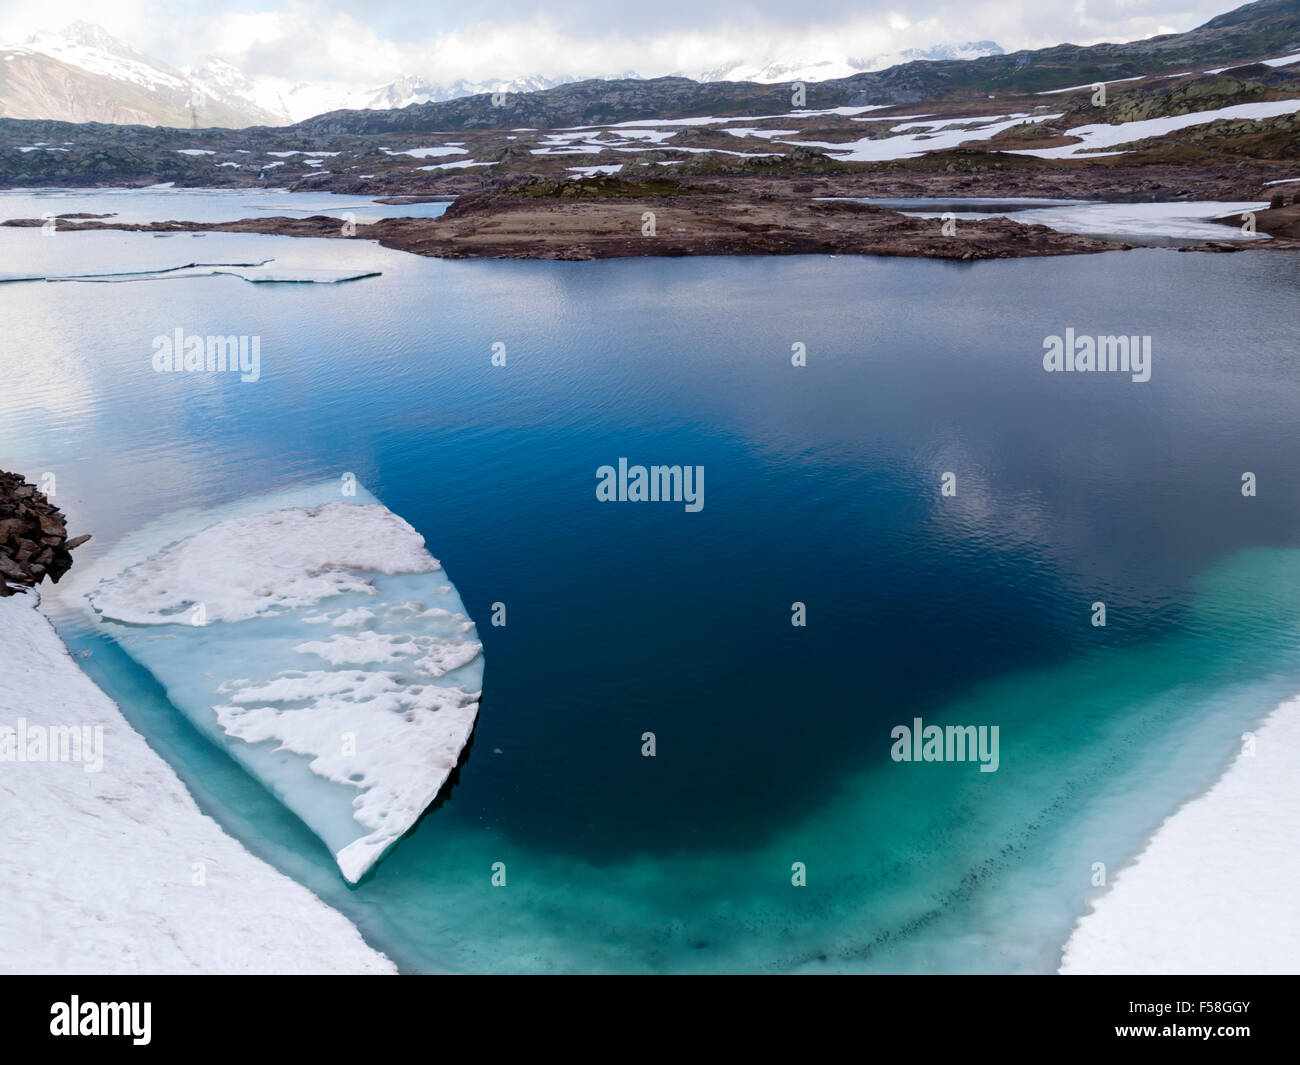 Sheet of ice are floating in the glacial lake 'Totensee' on top of the Grimsel pass, Switzerland (altitude 2165m). Stock Photo